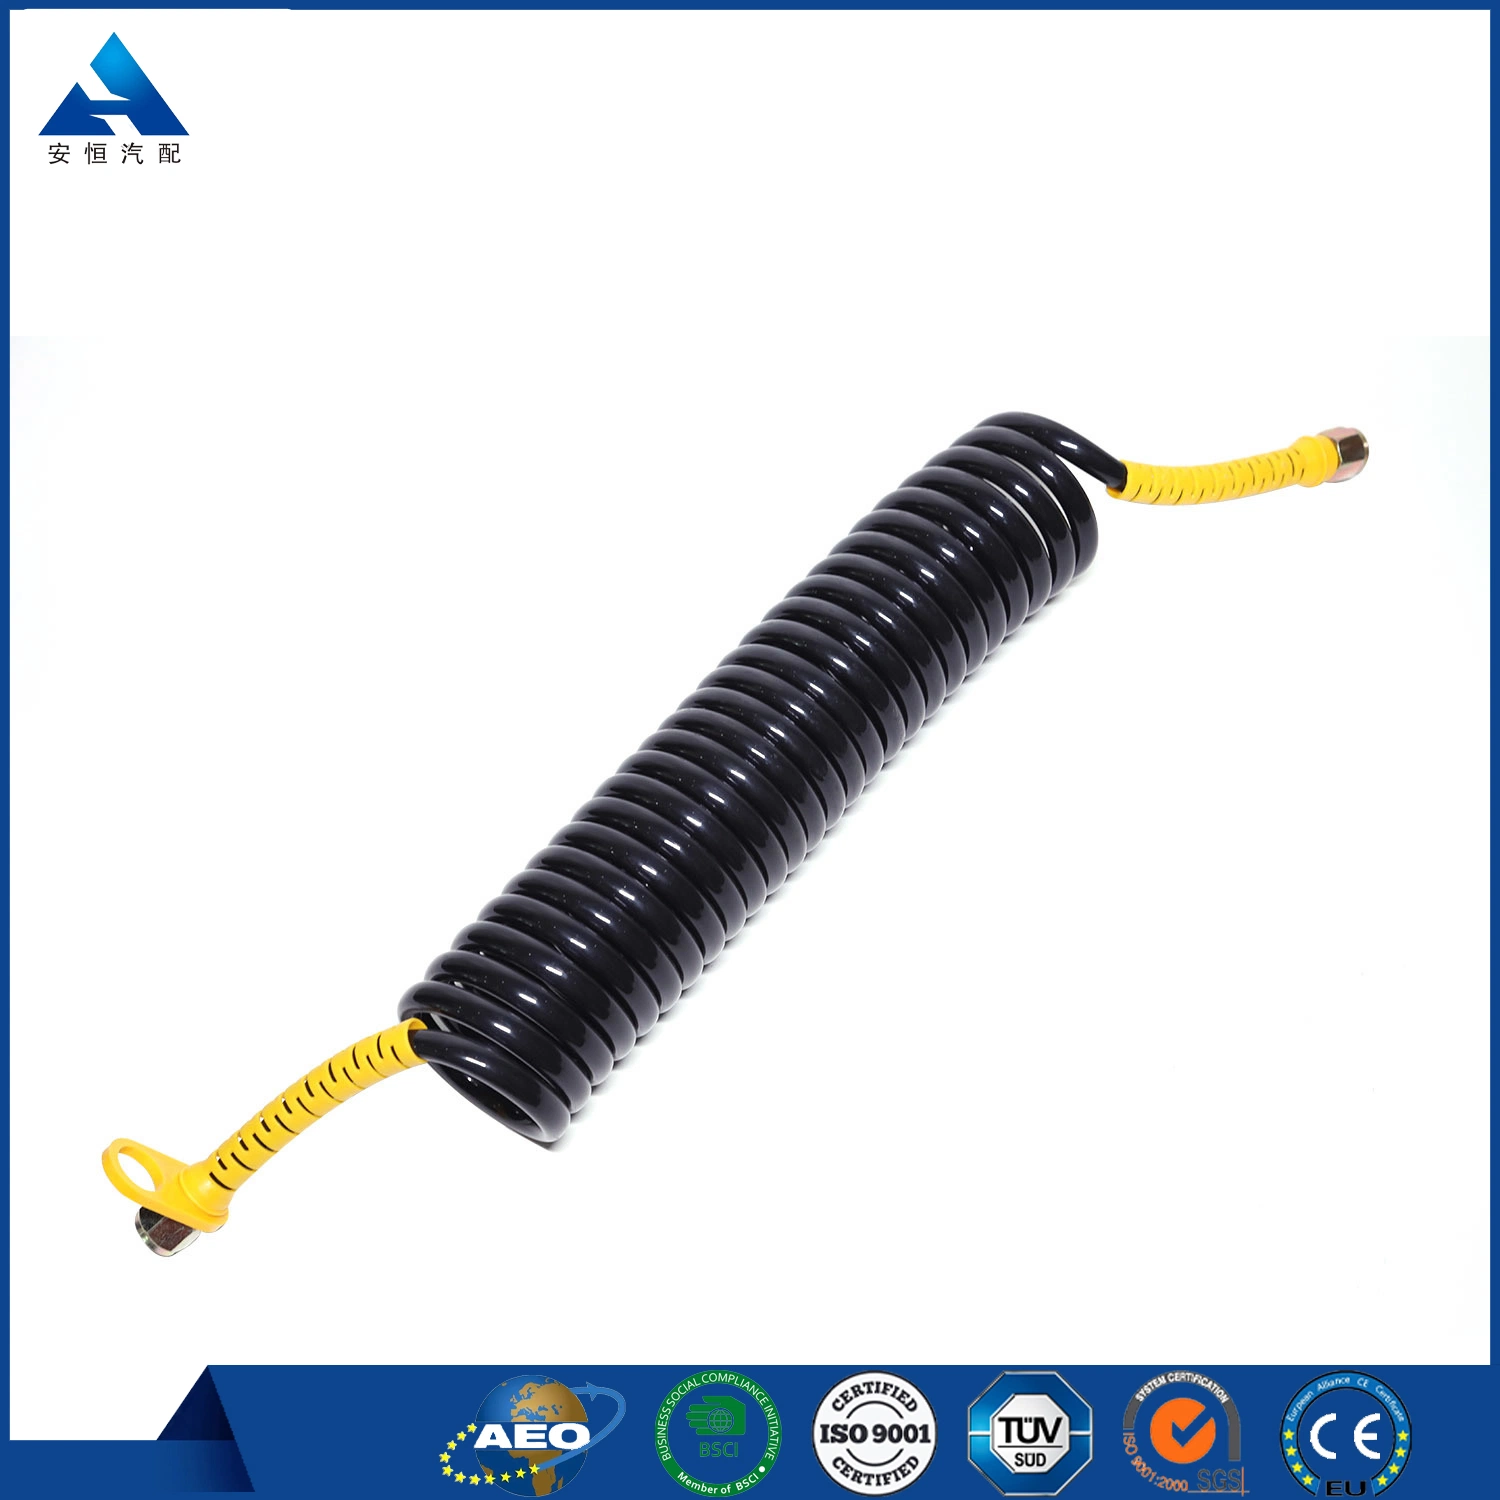 Polyurethane Recoil 6*4mm Air Compressor Hose with Industrial Quick Coupler and Plug